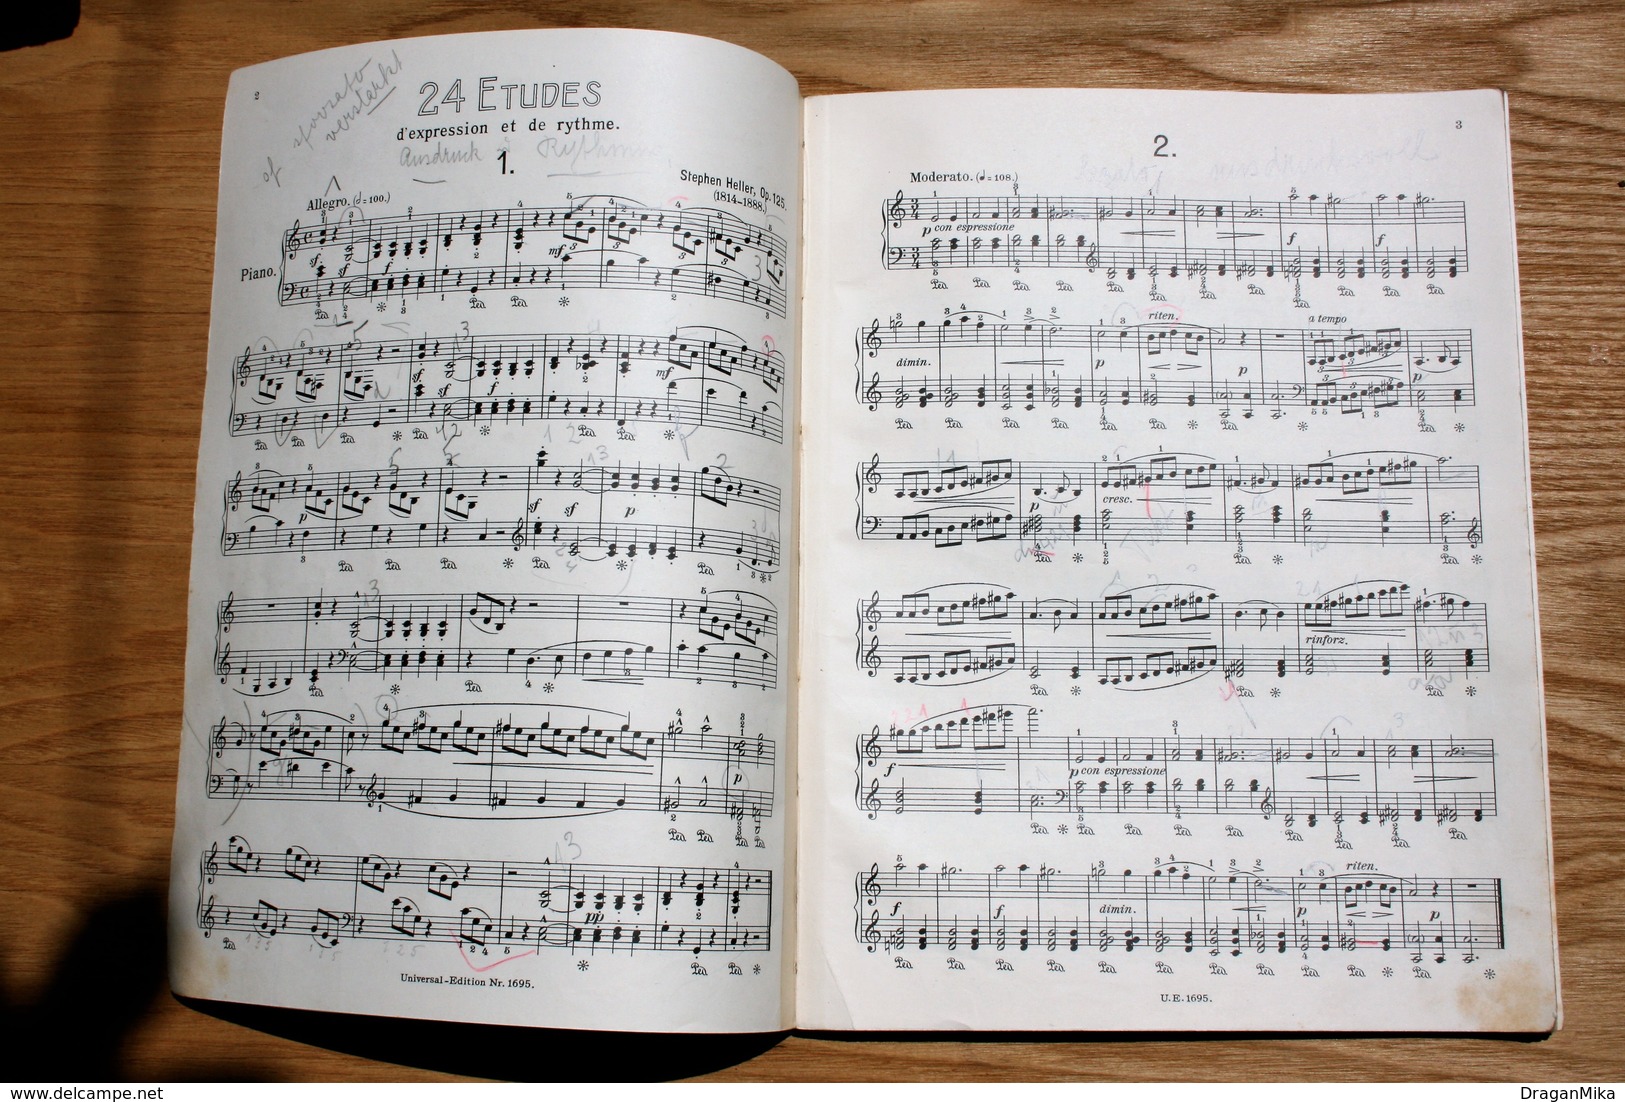 STEPHEN HELLER - 24 ETUDE FOR YOUNG OP. 125 - Music Notebook - Austria, RARE, FREE SHIPPING - Musique